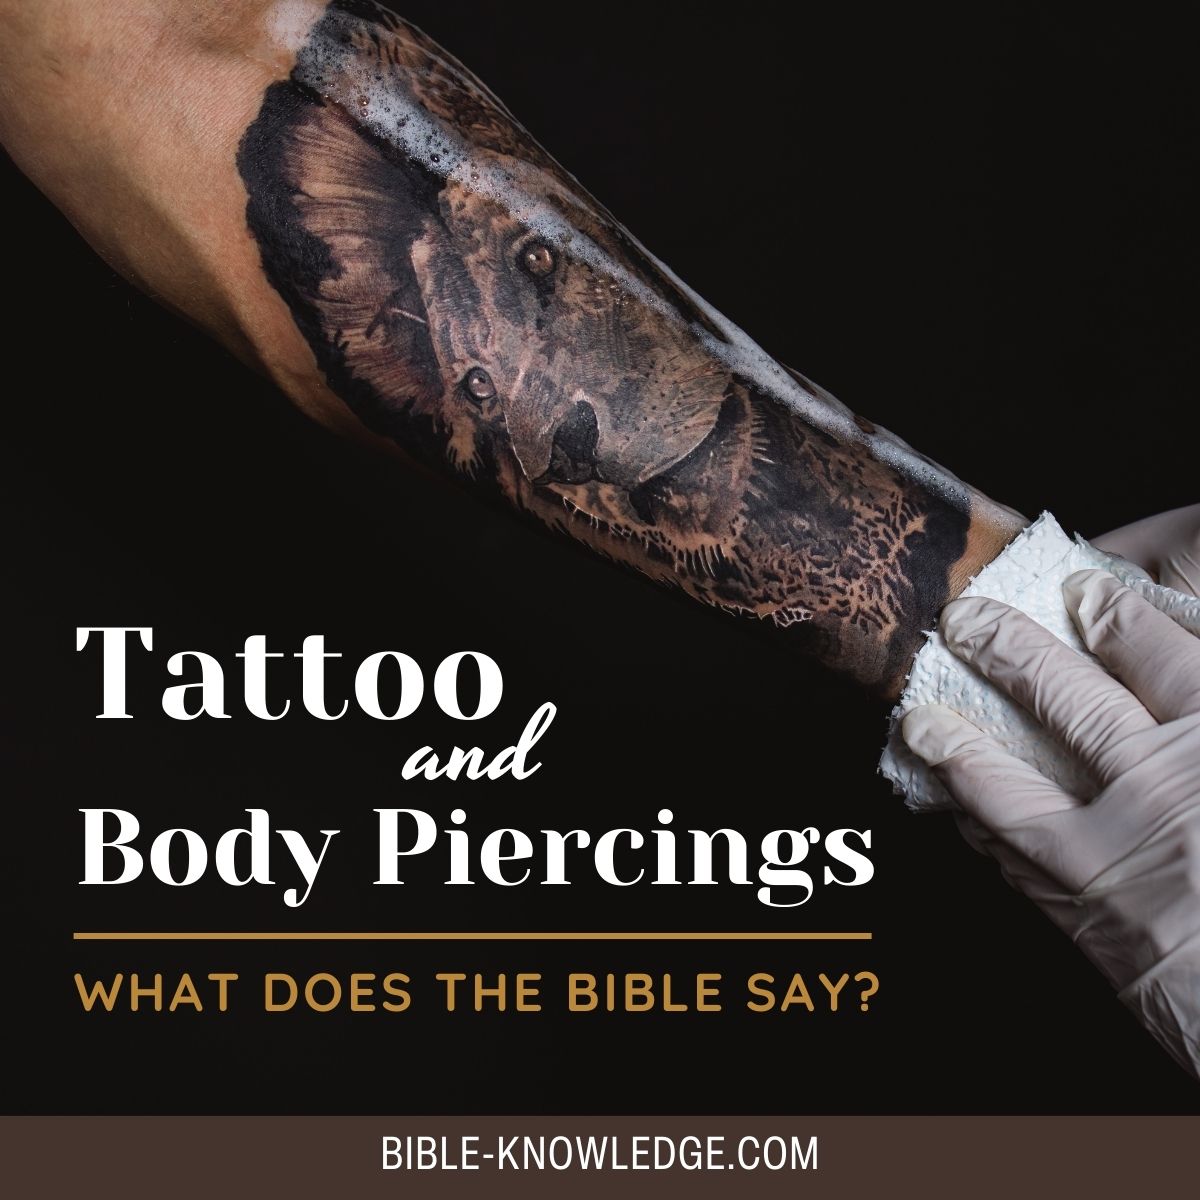 Tattoos and Body Piercings